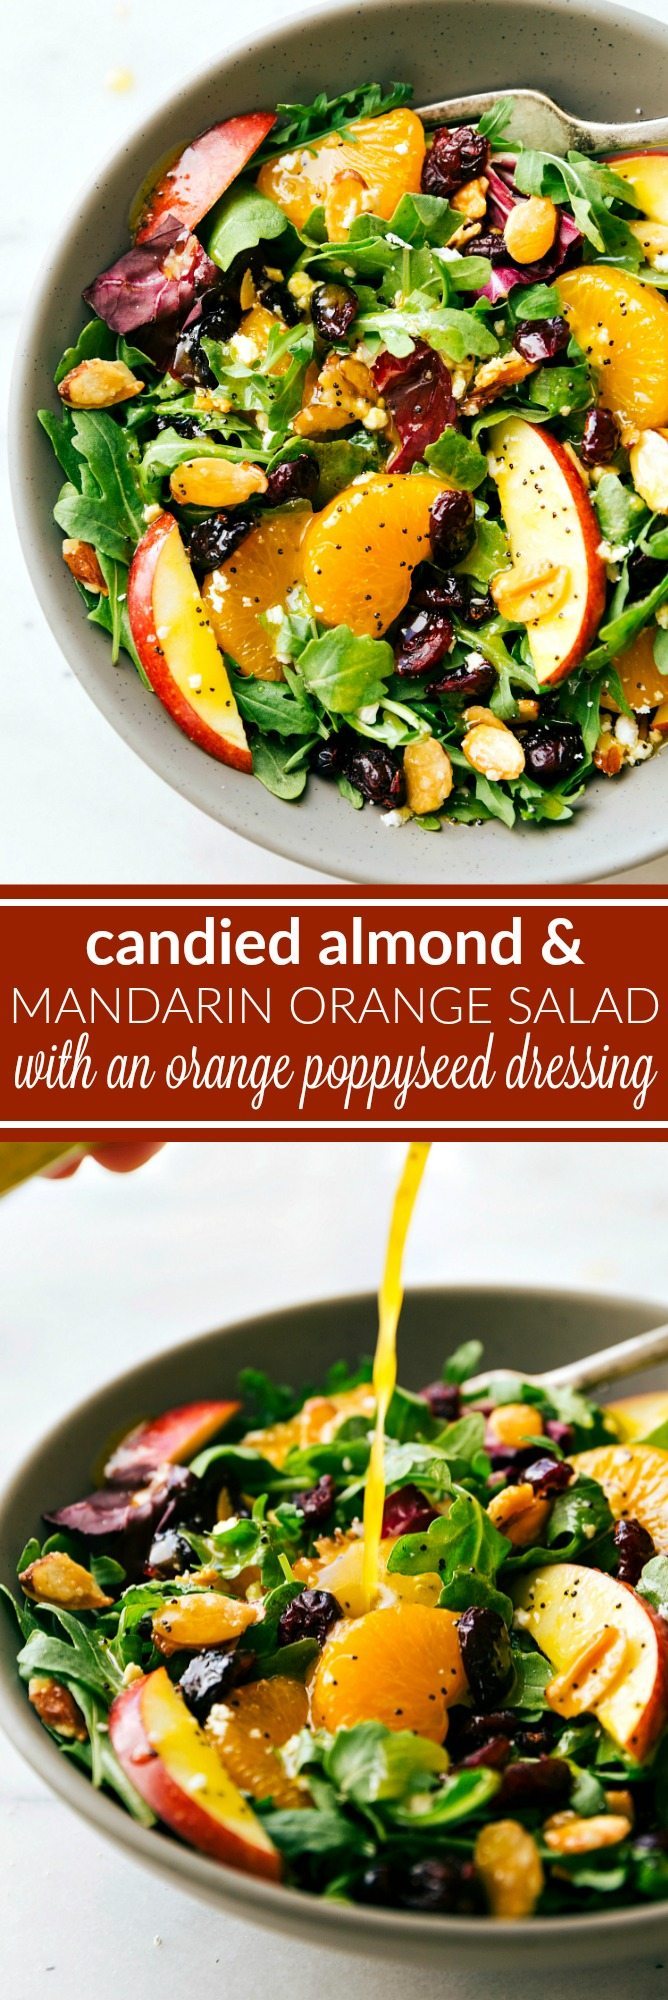 A great holiday entertaining salad -- mandarin orange, apples, cranberries, feta cheese, and easy stovetop candied almonds all covered in a delicious orange poppyseed dressing. via chelseasmessyapron.com